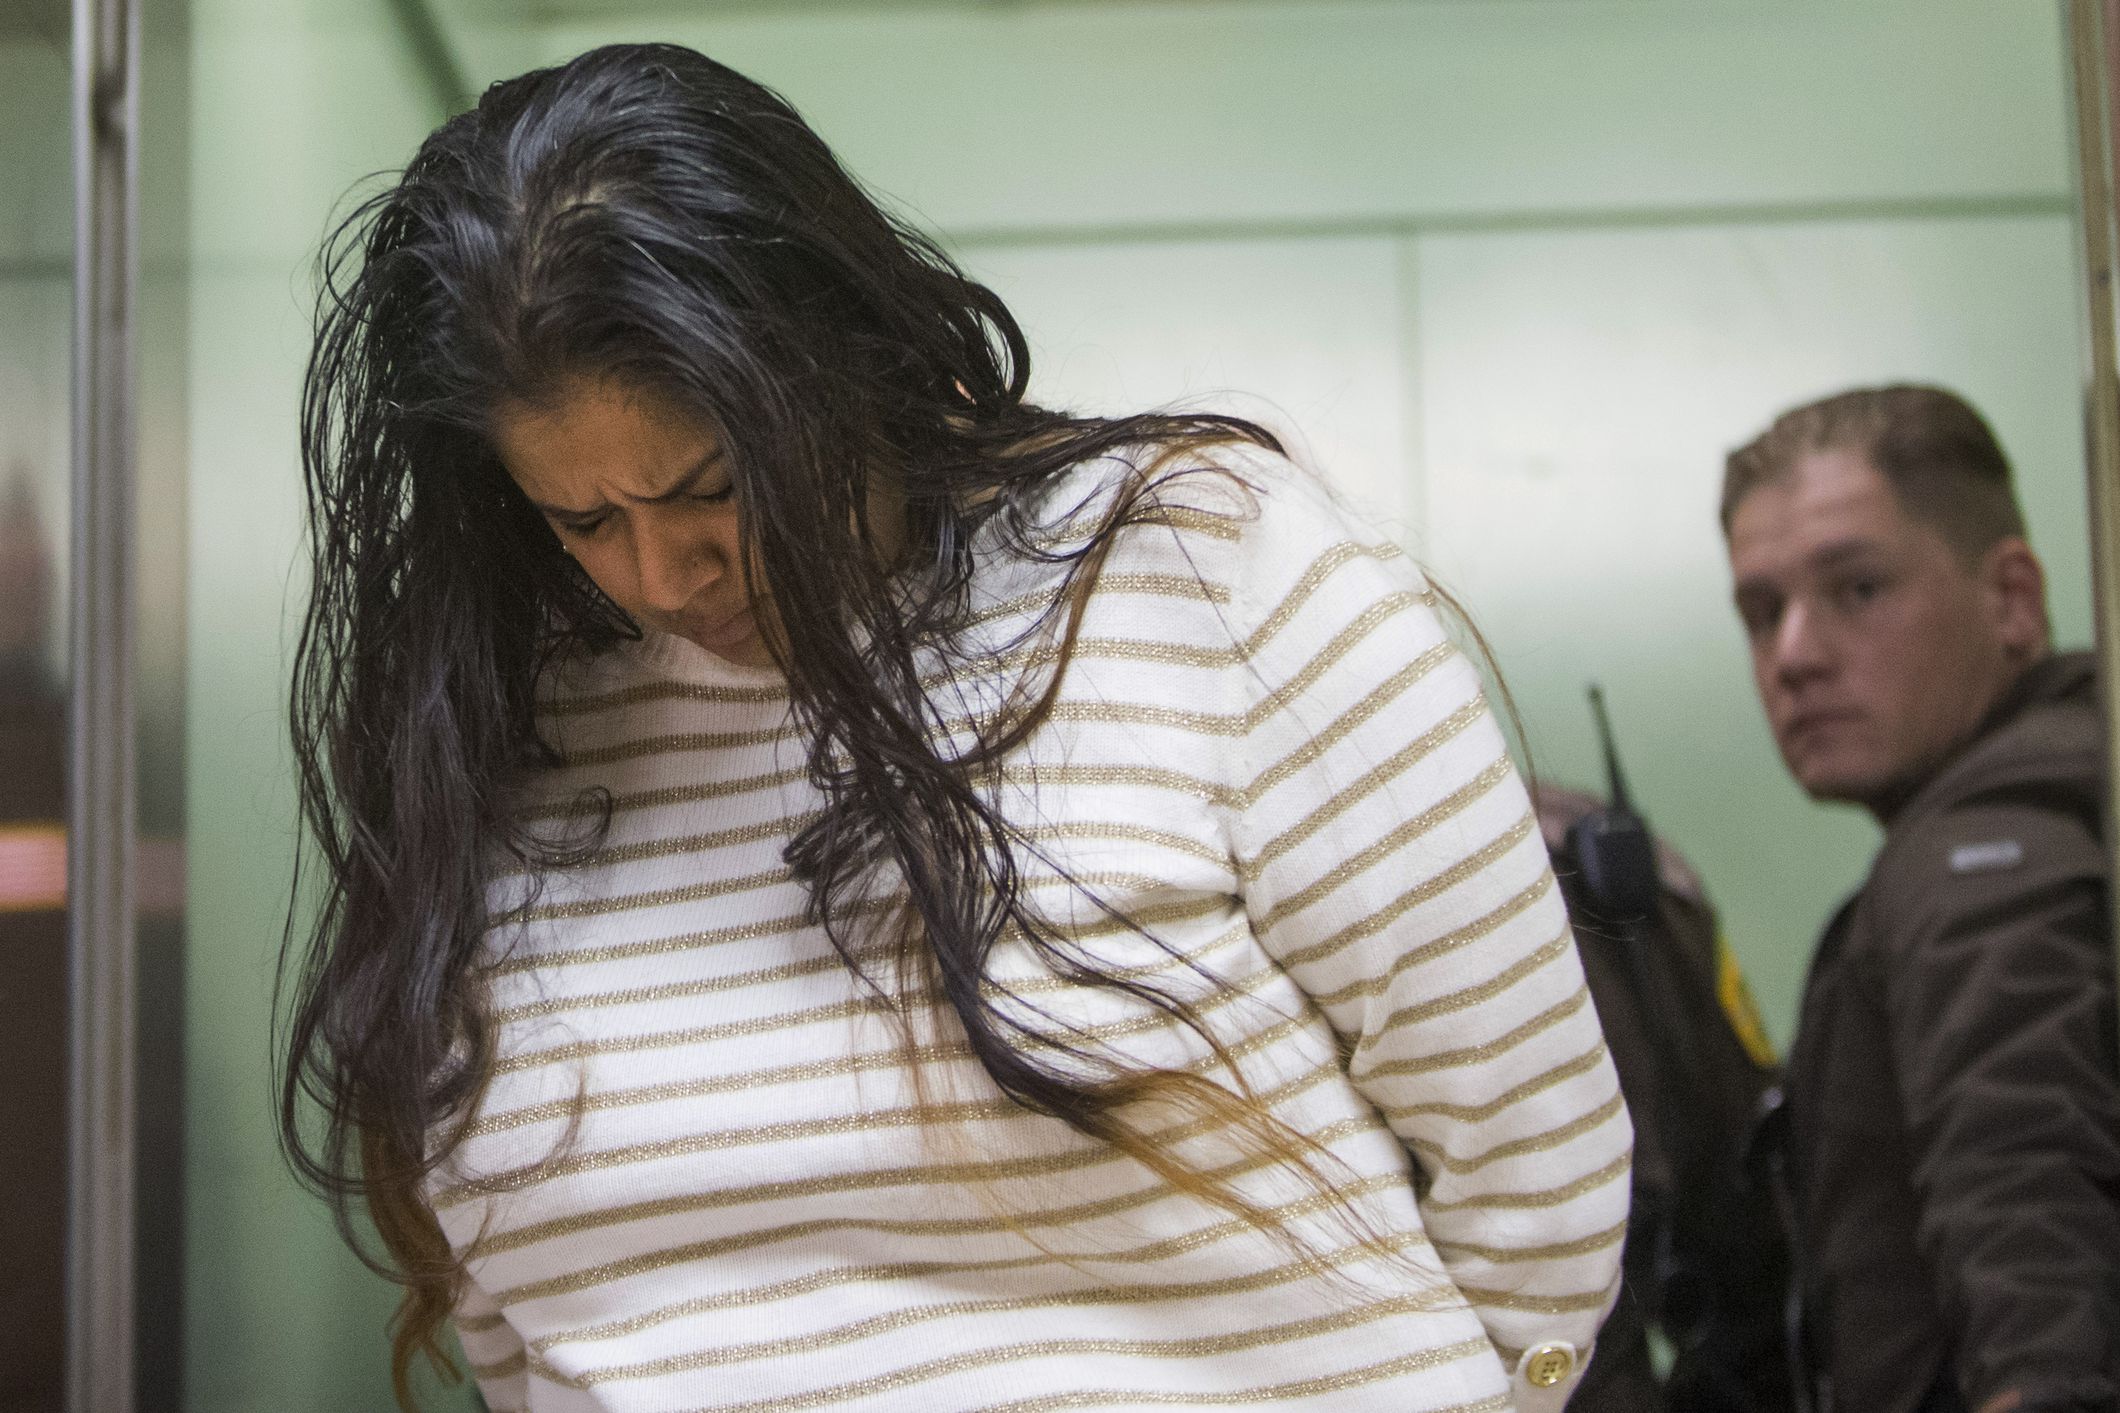 Purvi Patel has 20-year sentence for inducing own abortion 